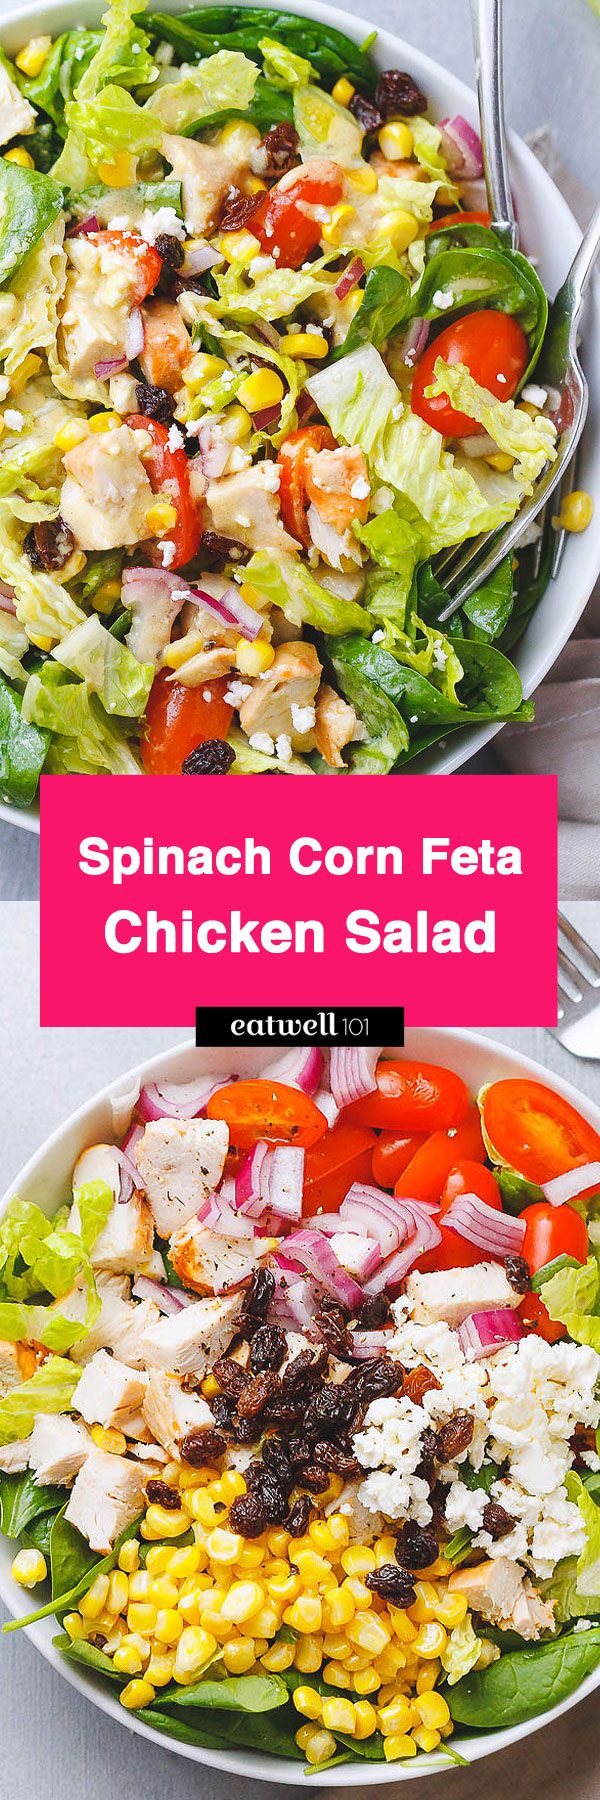 Chicken Salad with Toasted Corn, Spinach and Feta - #chicken #salad #recipe #eatwell101 - Light, delicious, and perfect for a lunch on-the-go.